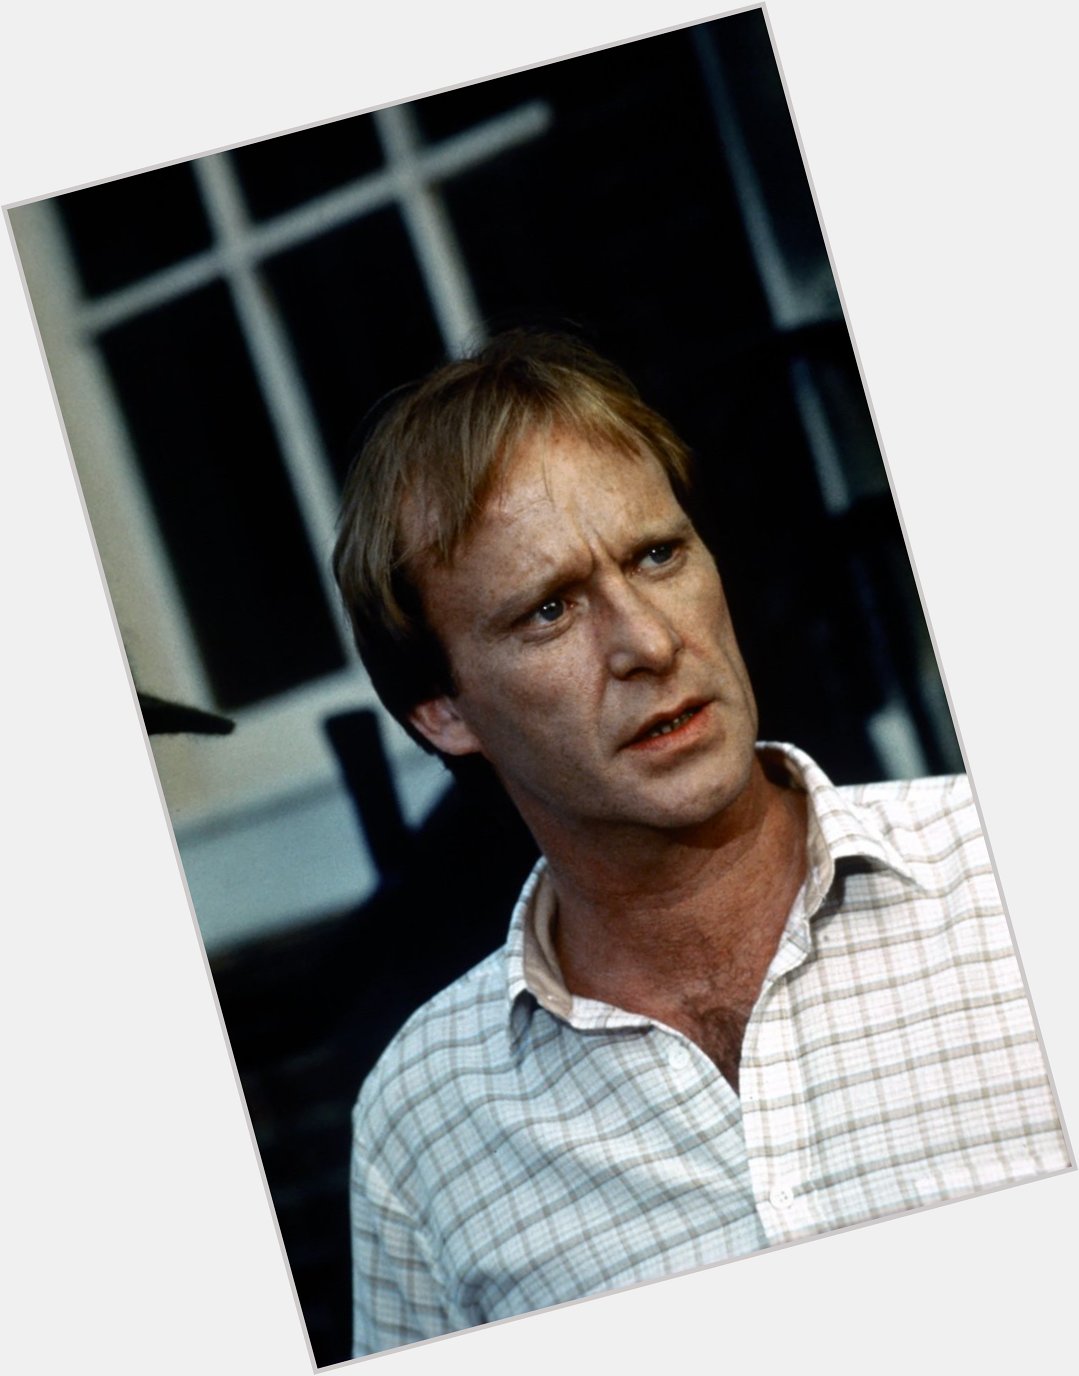 Good Morning!
Happy Birthday to Dennis Waterman.
He turns 71 today. 